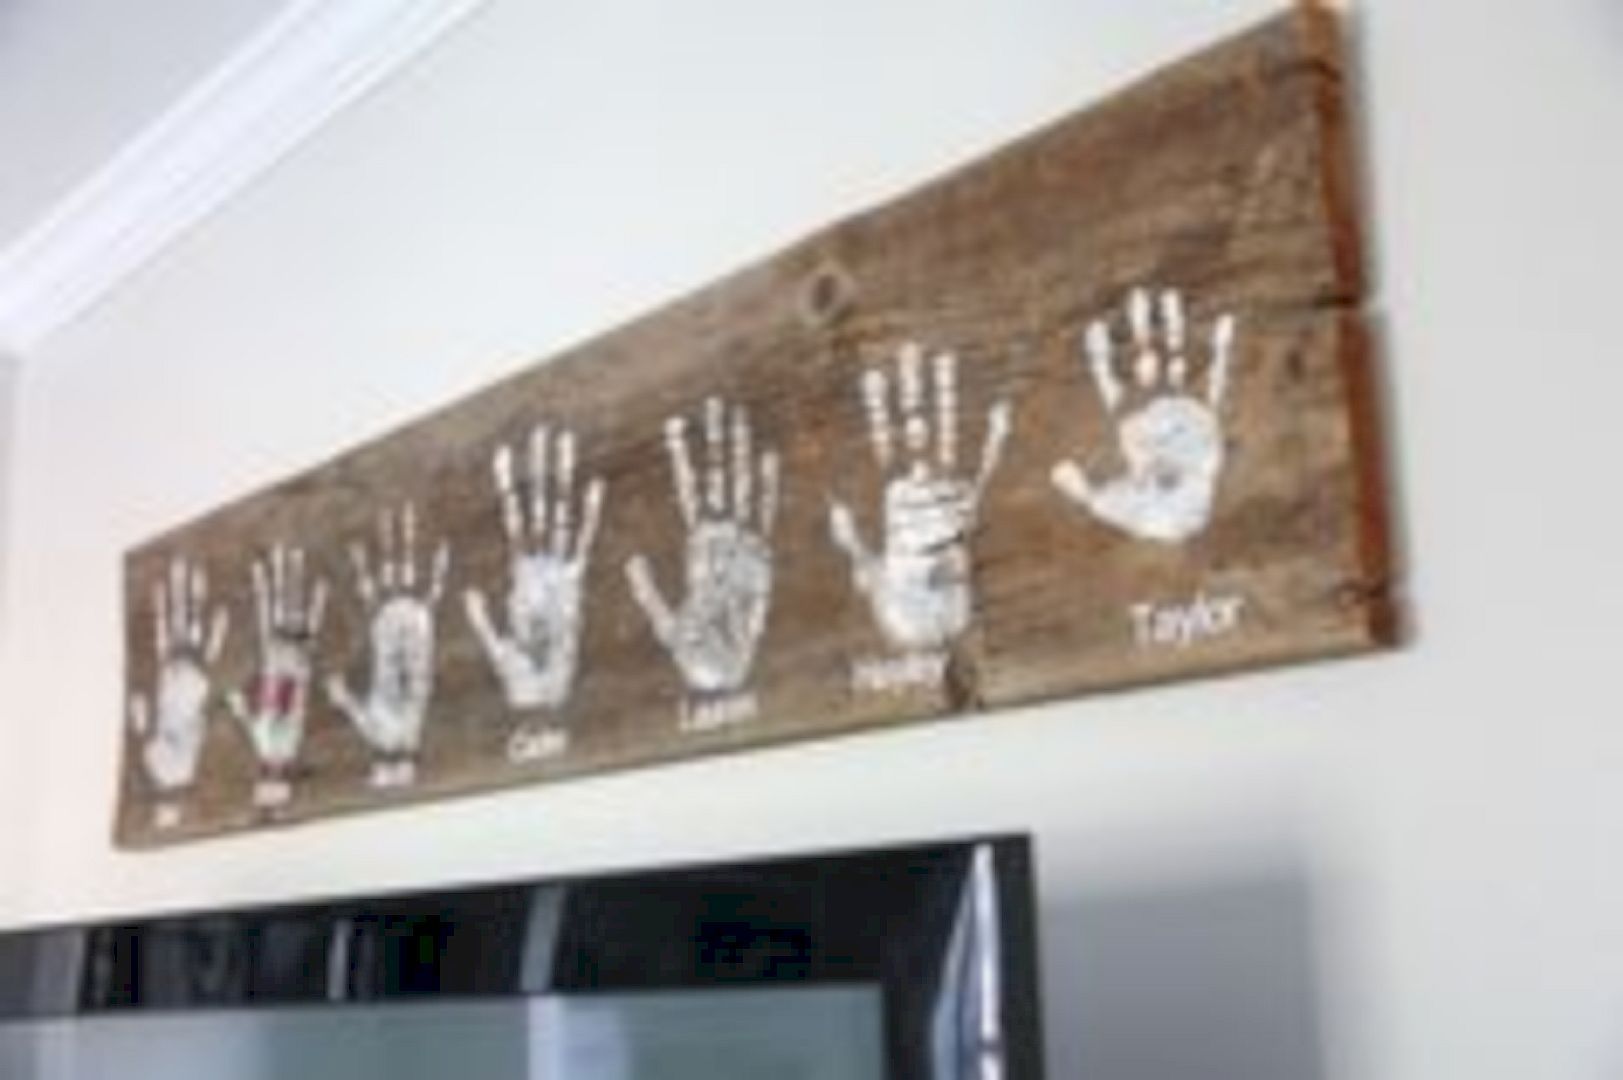 109 Wonderful Diy Rustic Wall Decor Ideas | Design Listicle Within Rustic Wall Art (View 7 of 20)